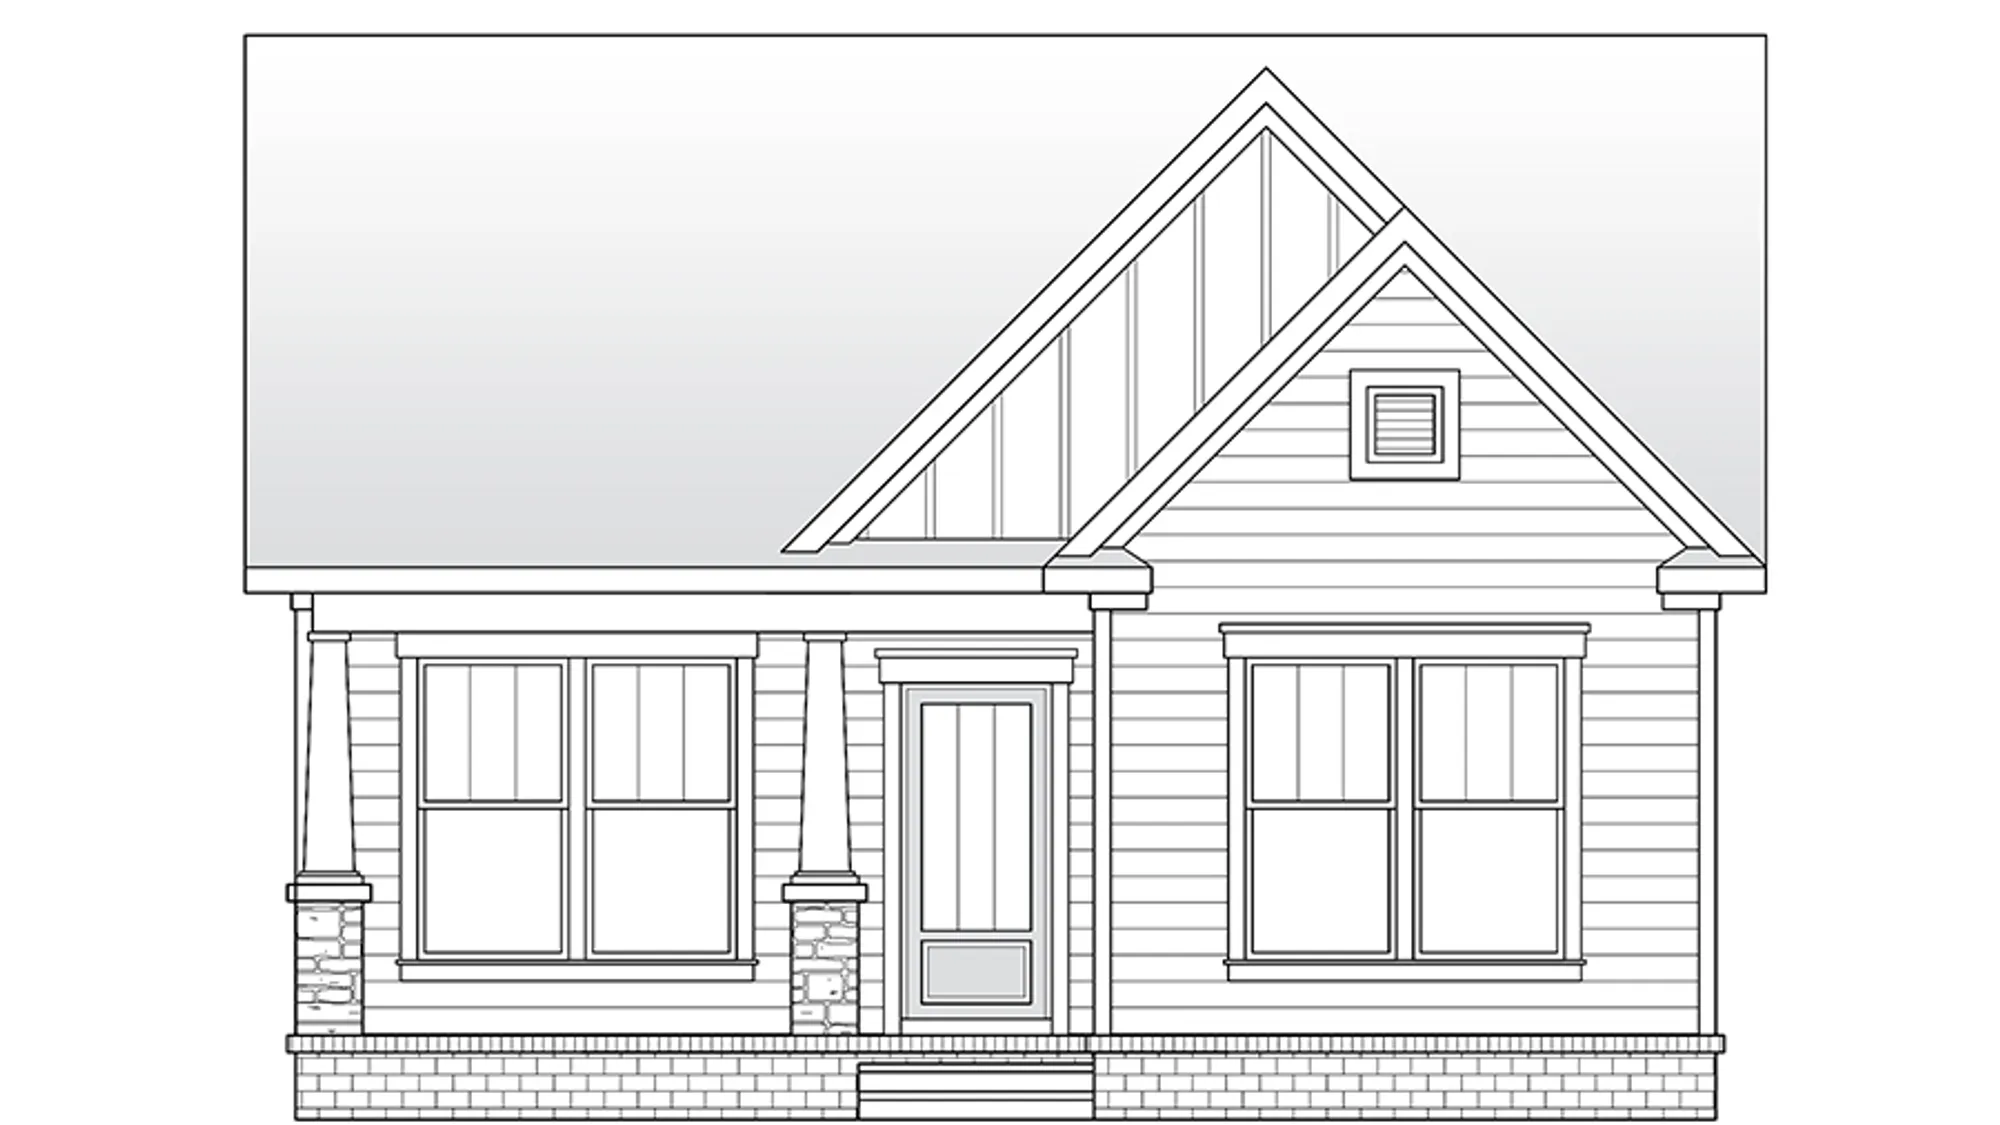 Florence II BG Elevation A front view siding